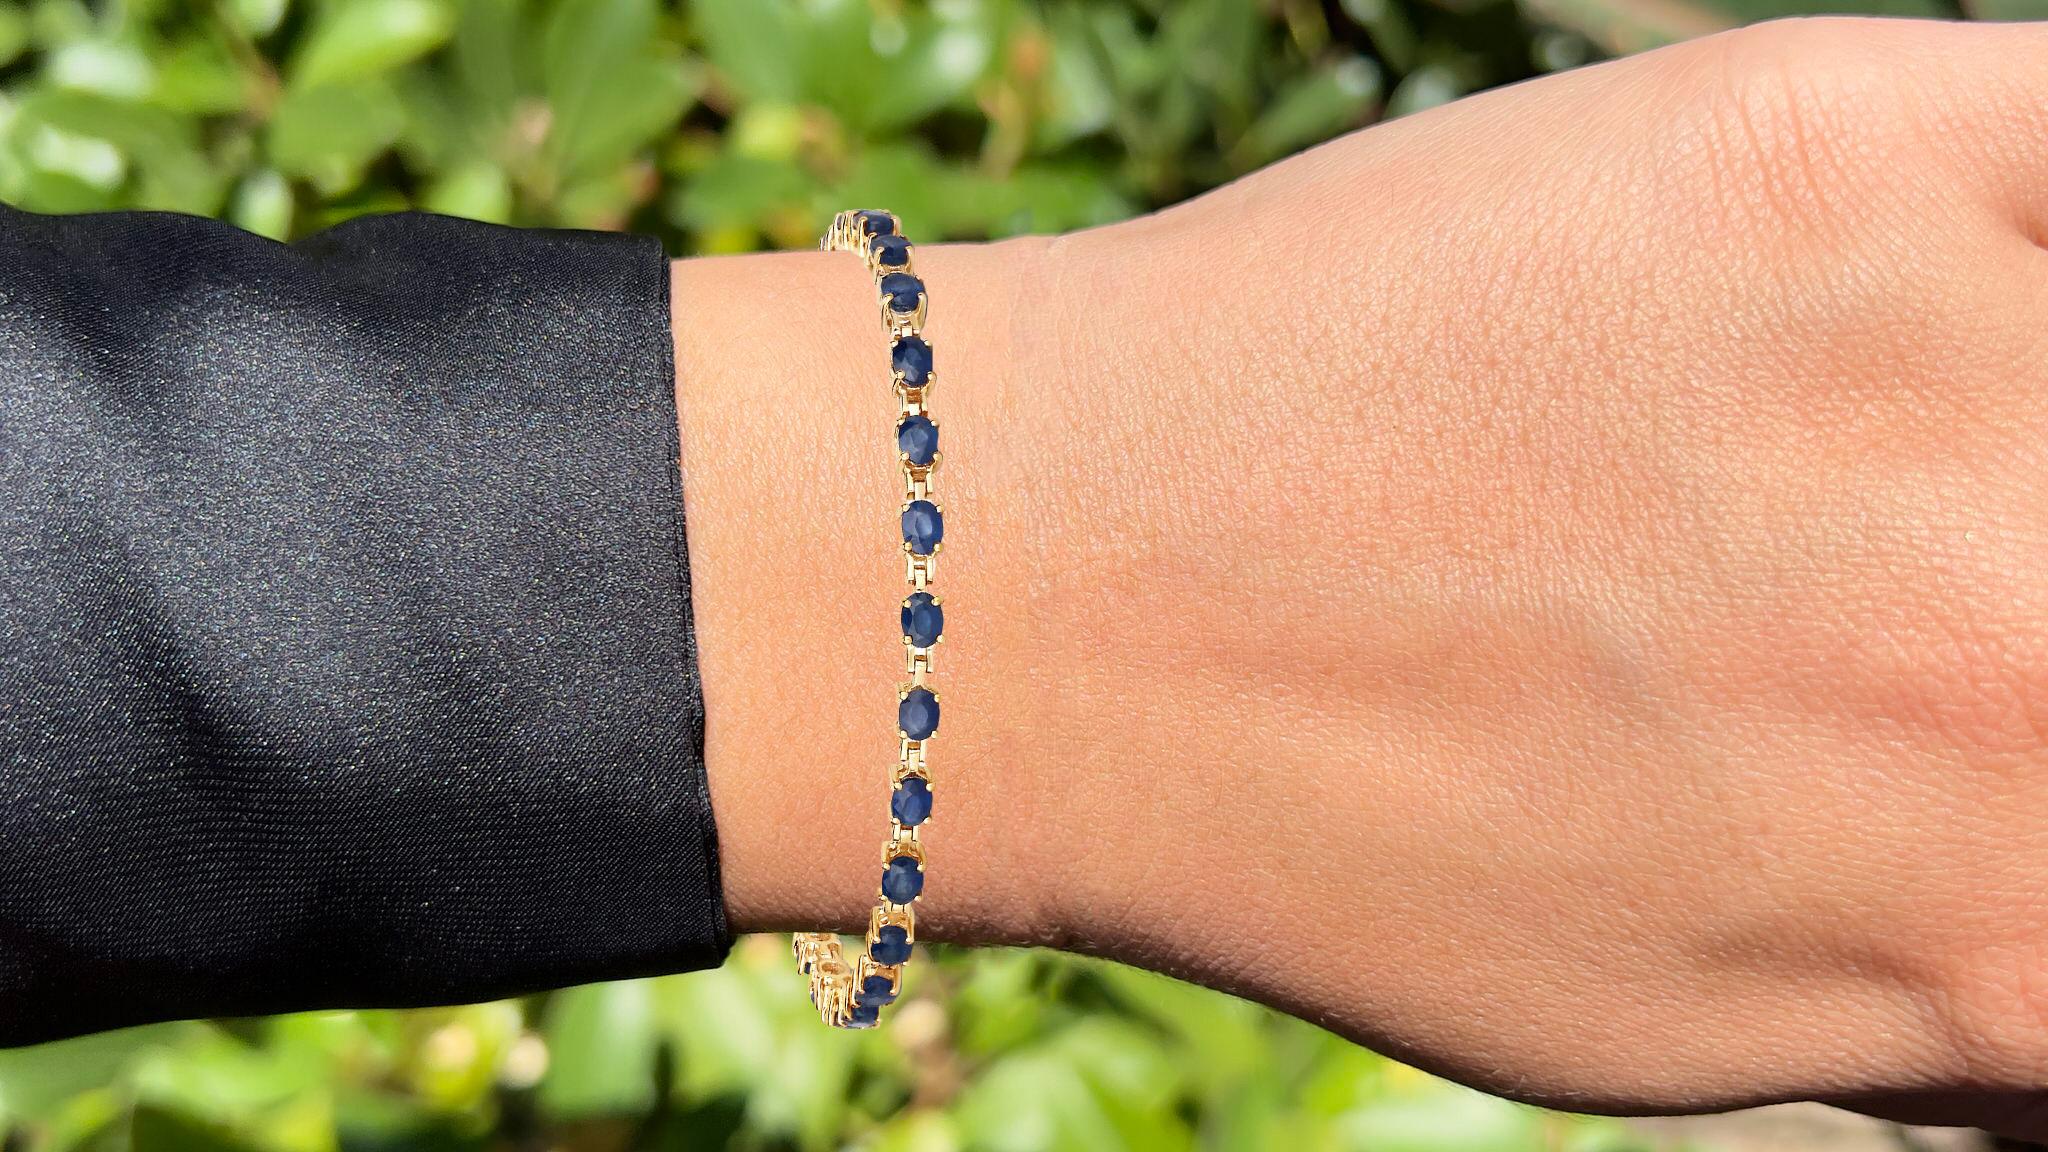 It comes with the appraisal by GIA GG/AJP
Blue Sapphire = 5.60 Carats
Cut: Oval
Total Quantity of Sapphires: 28
Metal: 14K Yellow Gold
Bracelet Length: 7 Inches